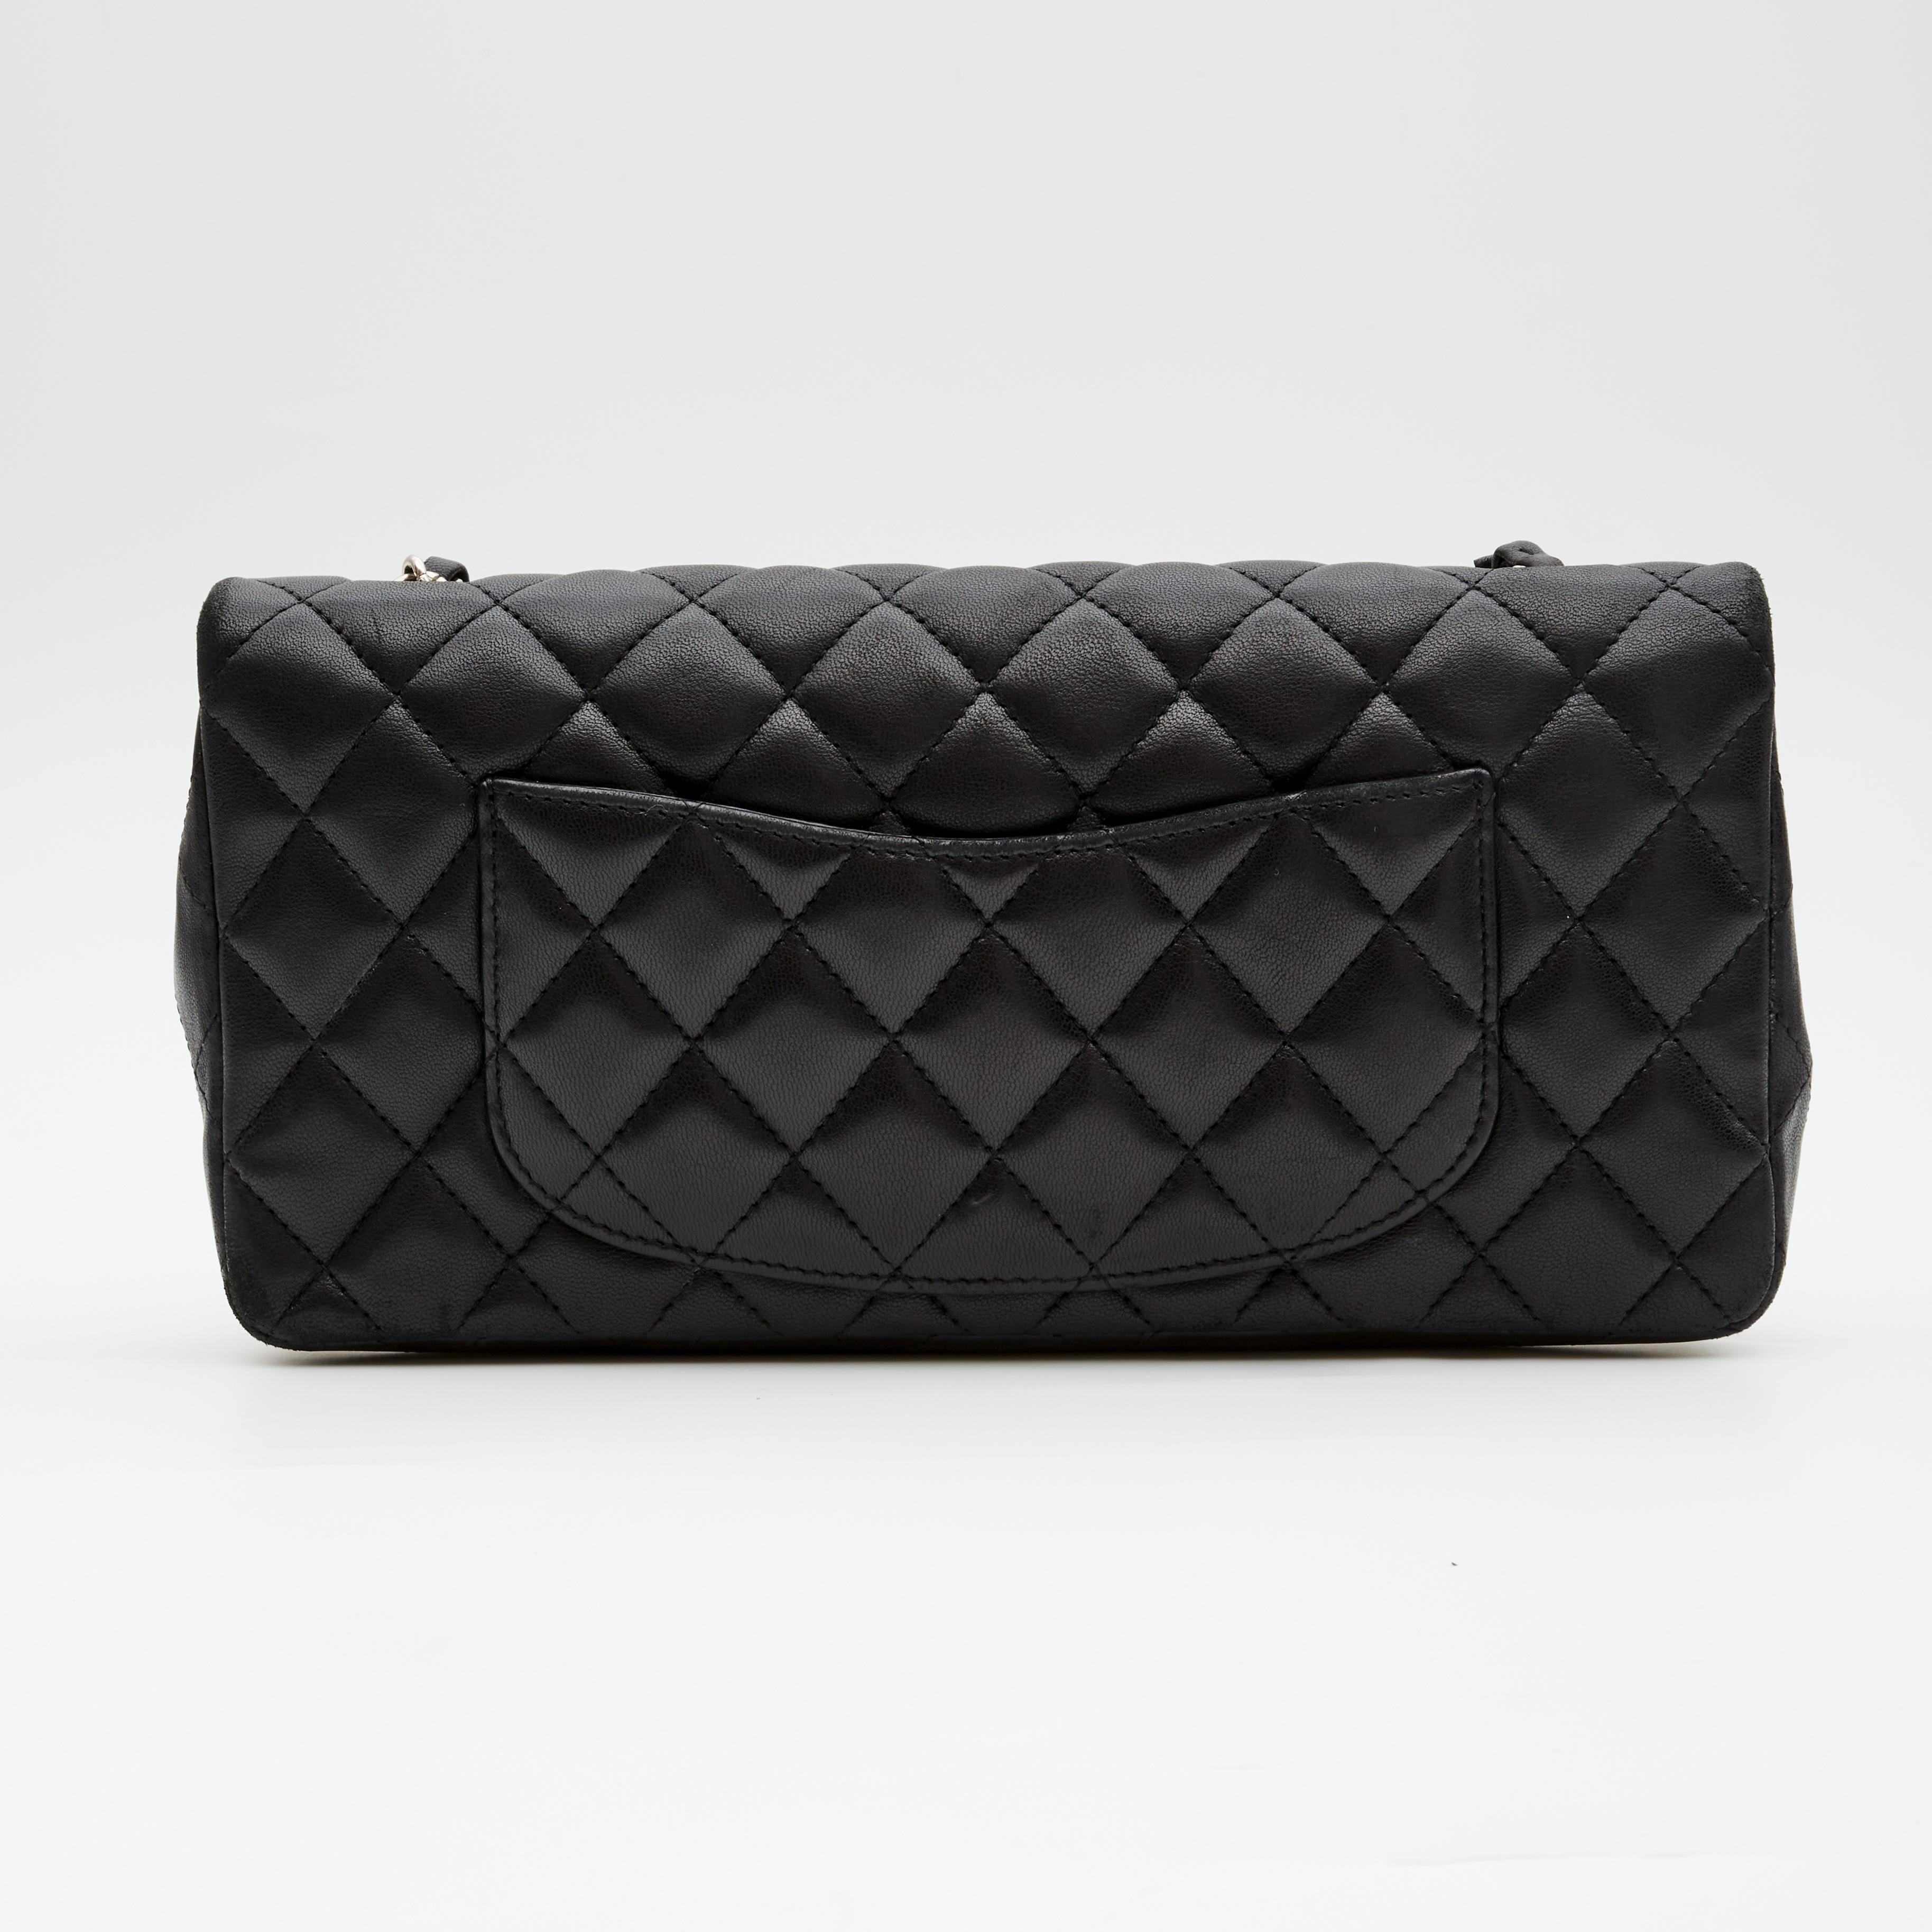 This shoulder bag is made with diamond quilted black lambskin leather. The extra-wide bag features sliver-tone hardware, a front flap with the signature interlocking CC turn lock closure, and a sliver-tone chain interlaced with leather. The front